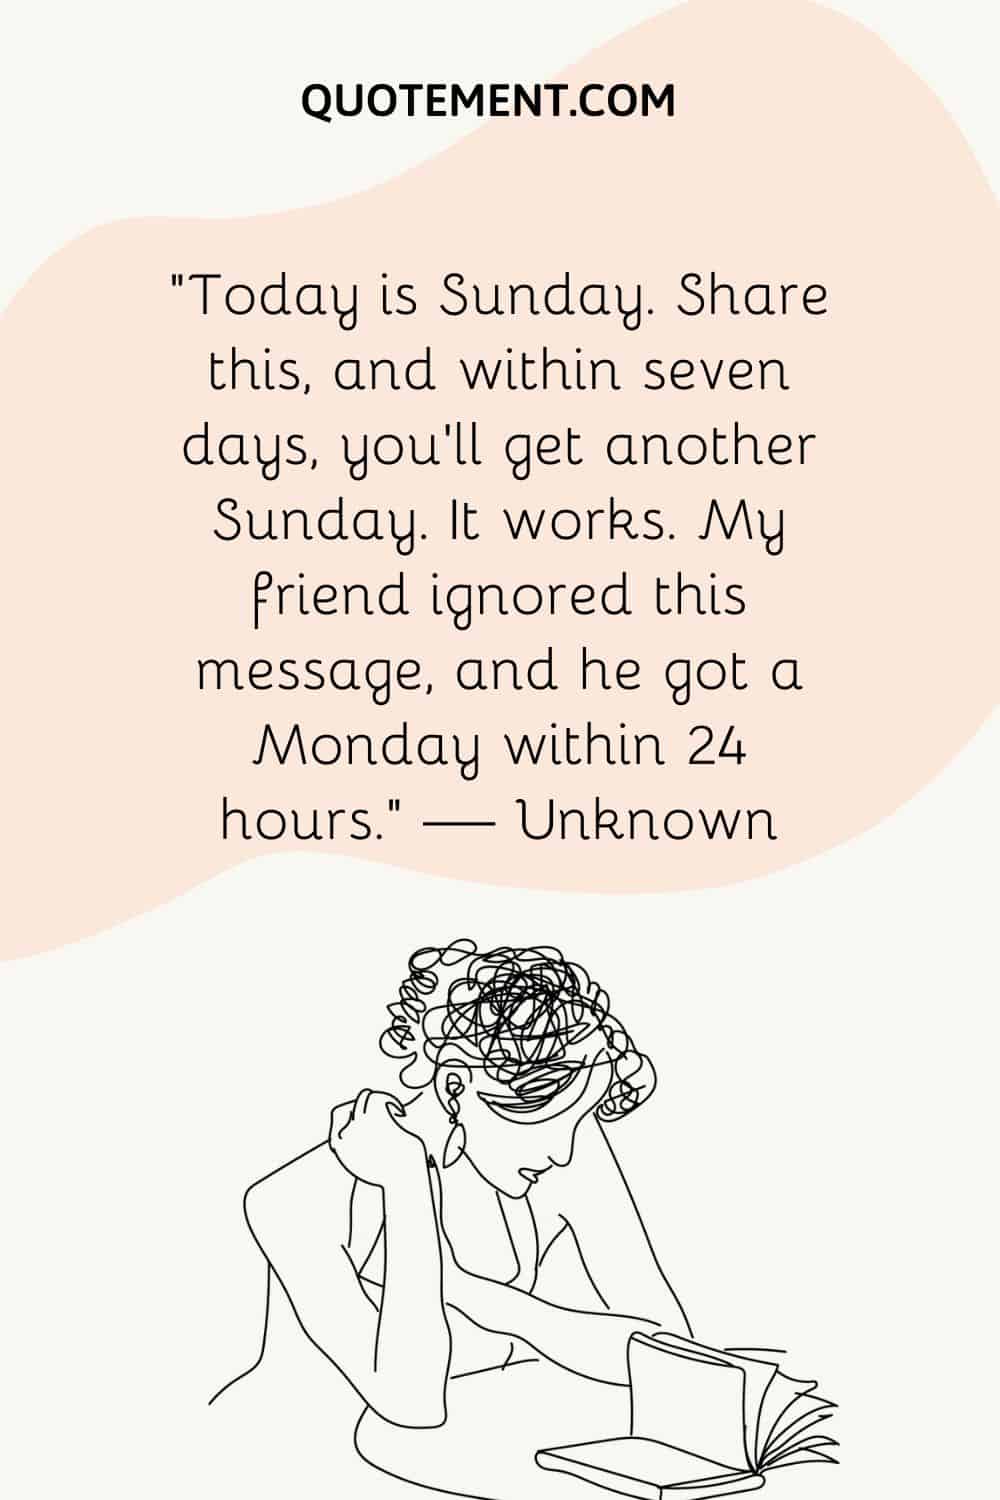 “Today is Sunday. Share this, and within seven days, you’ll get another Sunday. It works. My friend ignored this message, and he got a Monday within 24 hours.” — Unknown